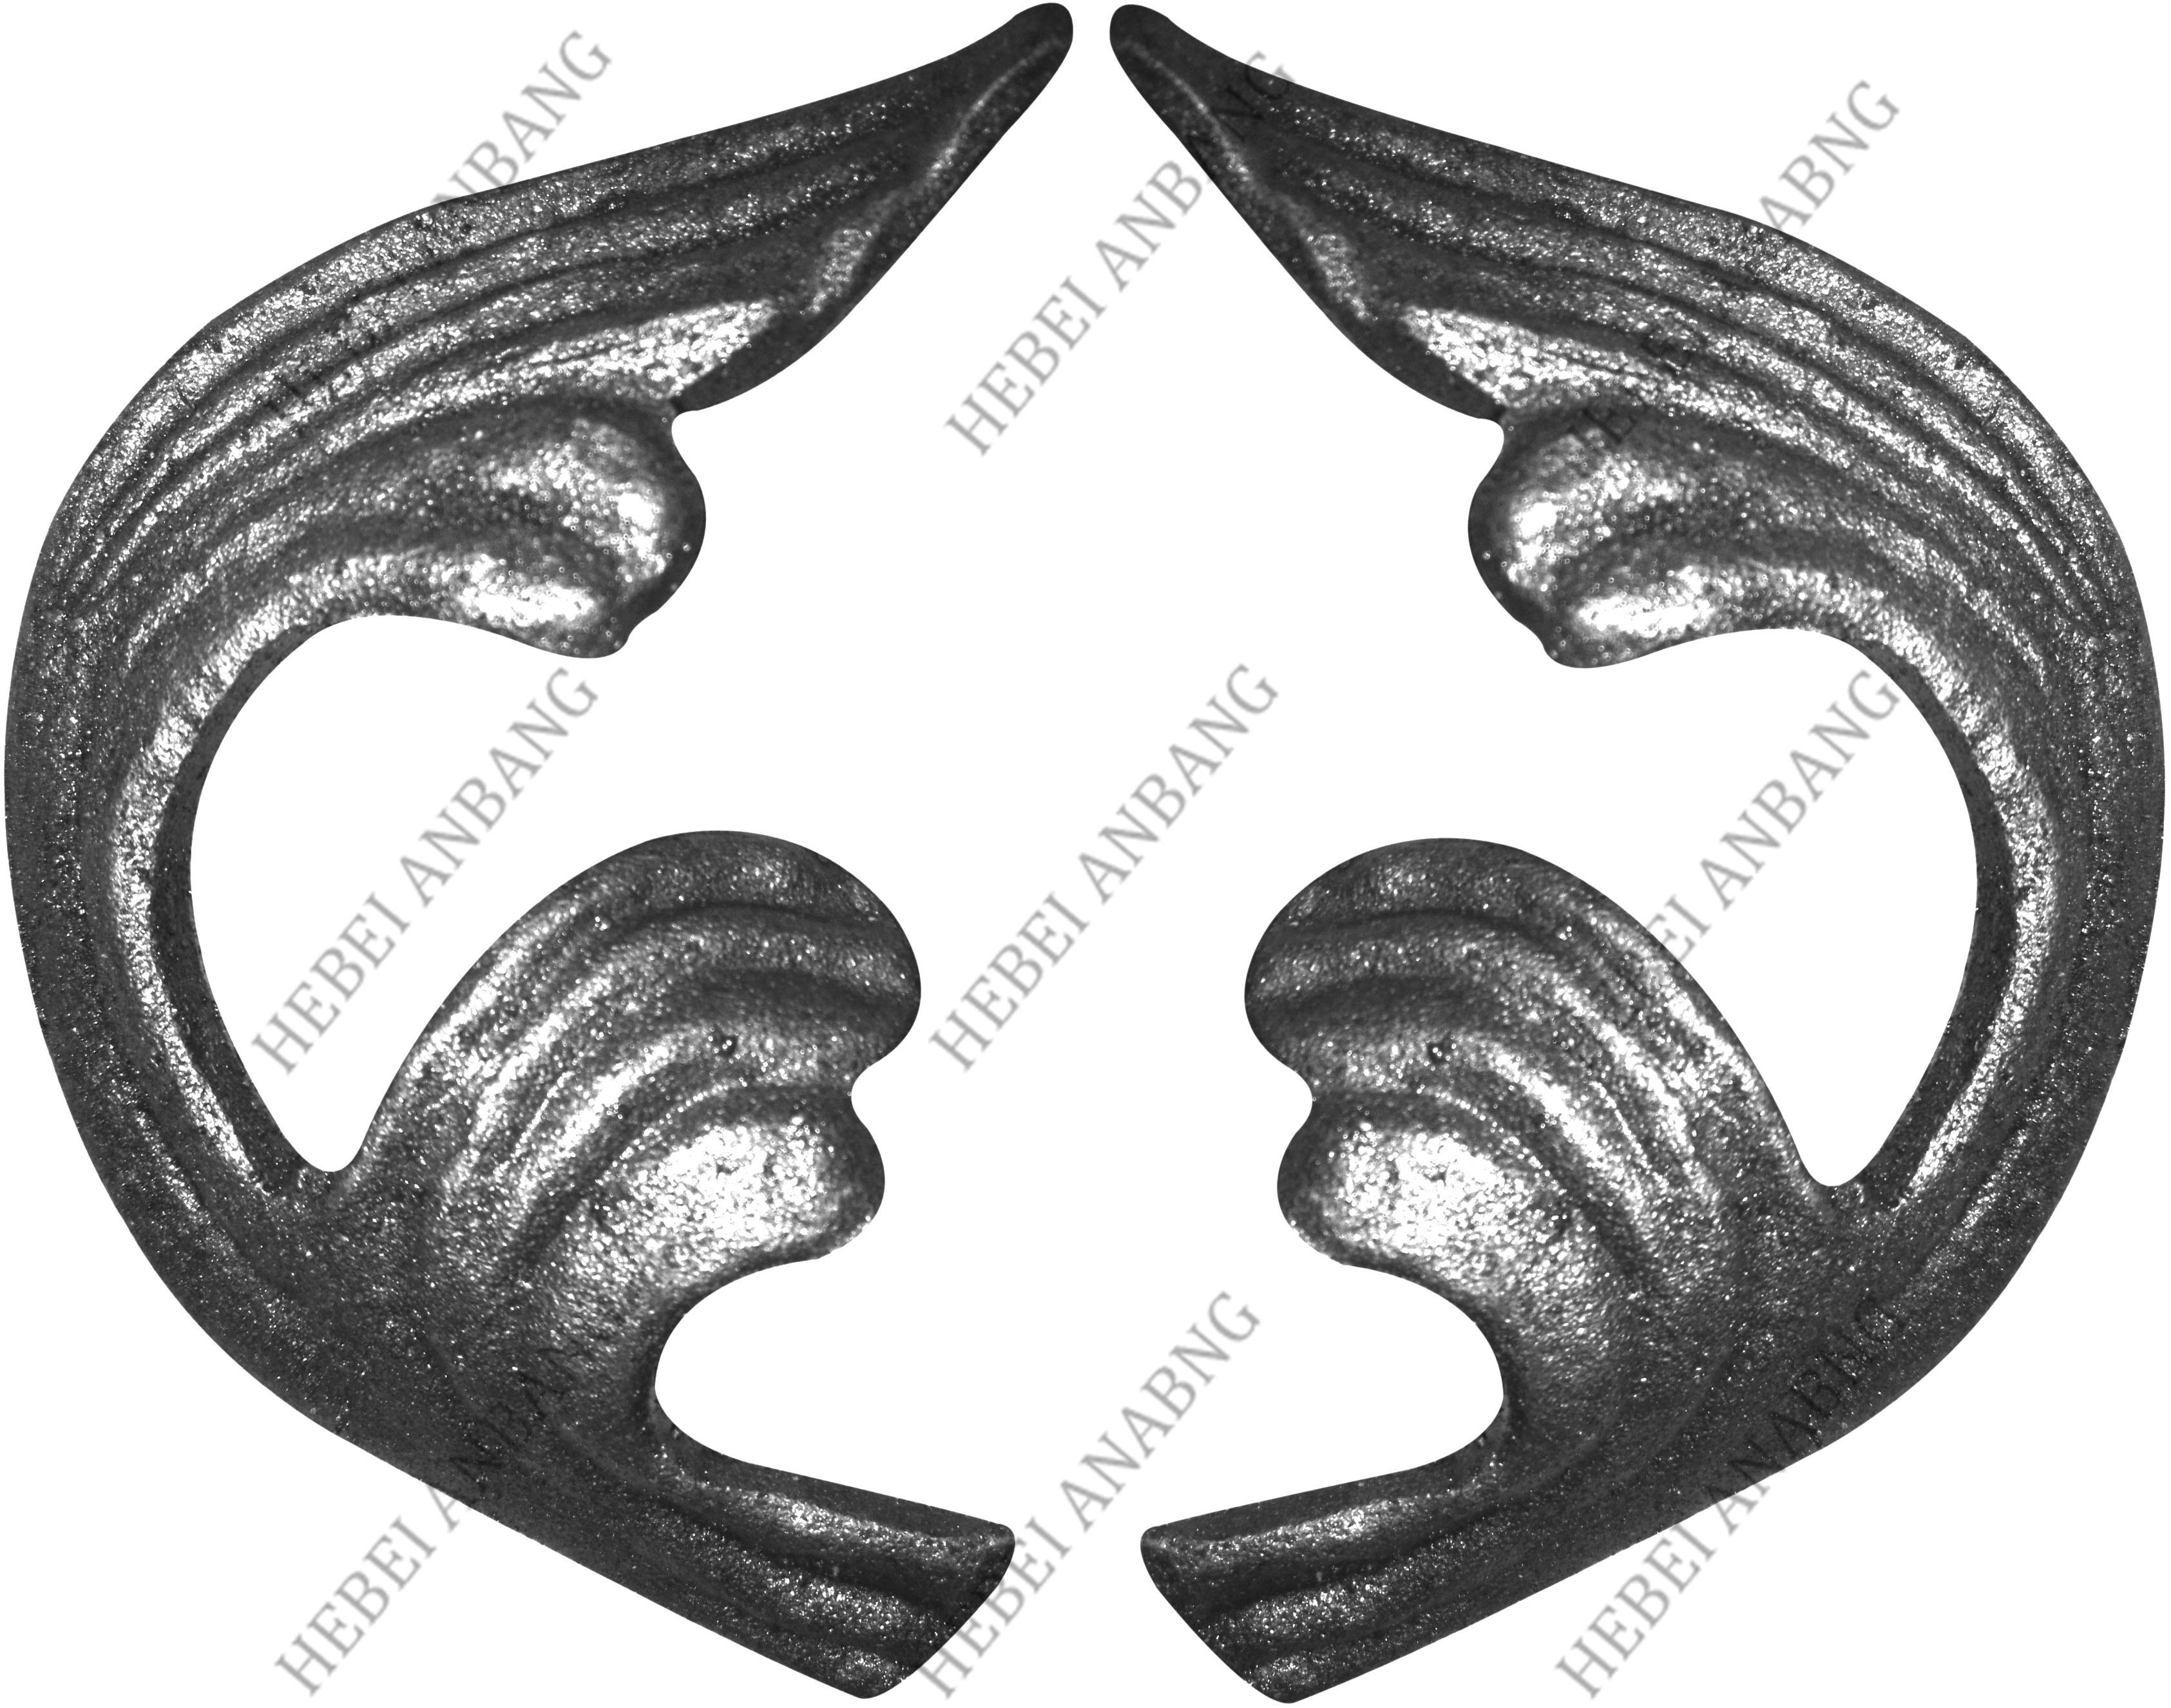 WHOLESALE WROUGHT IRON LEAVES/DECORATIVE CAST STEEL LEAVES AND FLOWER /CODE：4271